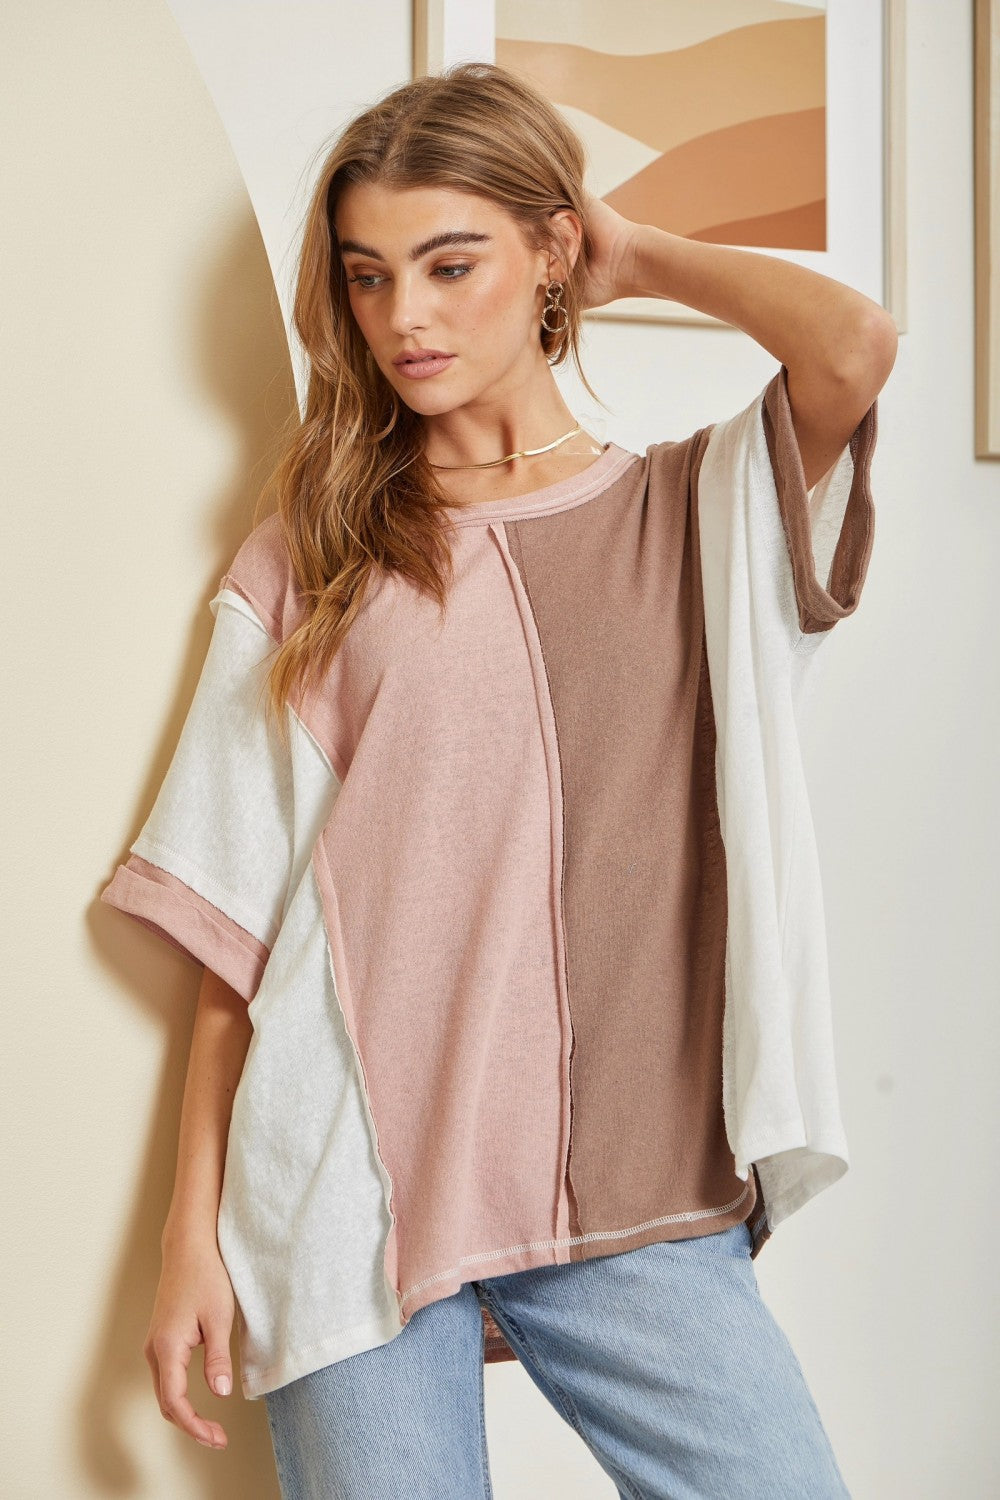 Half Sleeve Colorblocked Top in Mauve-Mocha by Andree by Unit